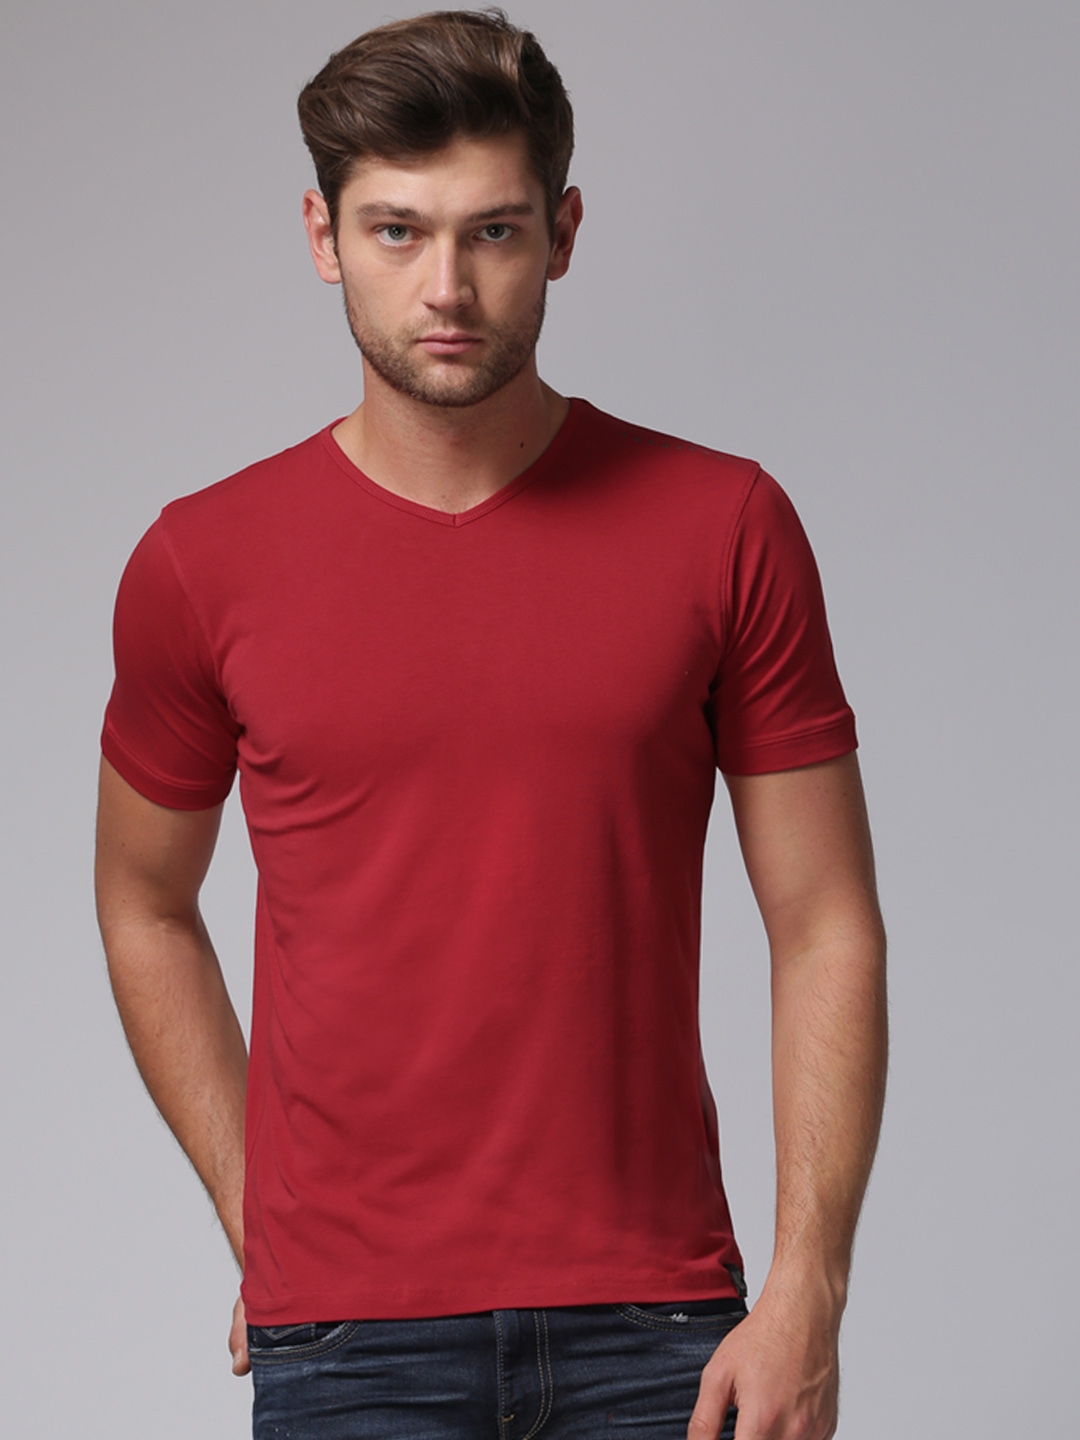 Buy YWC Red Solid V Neck T Shirt - Tshirts for Men 1774283 | Myntra